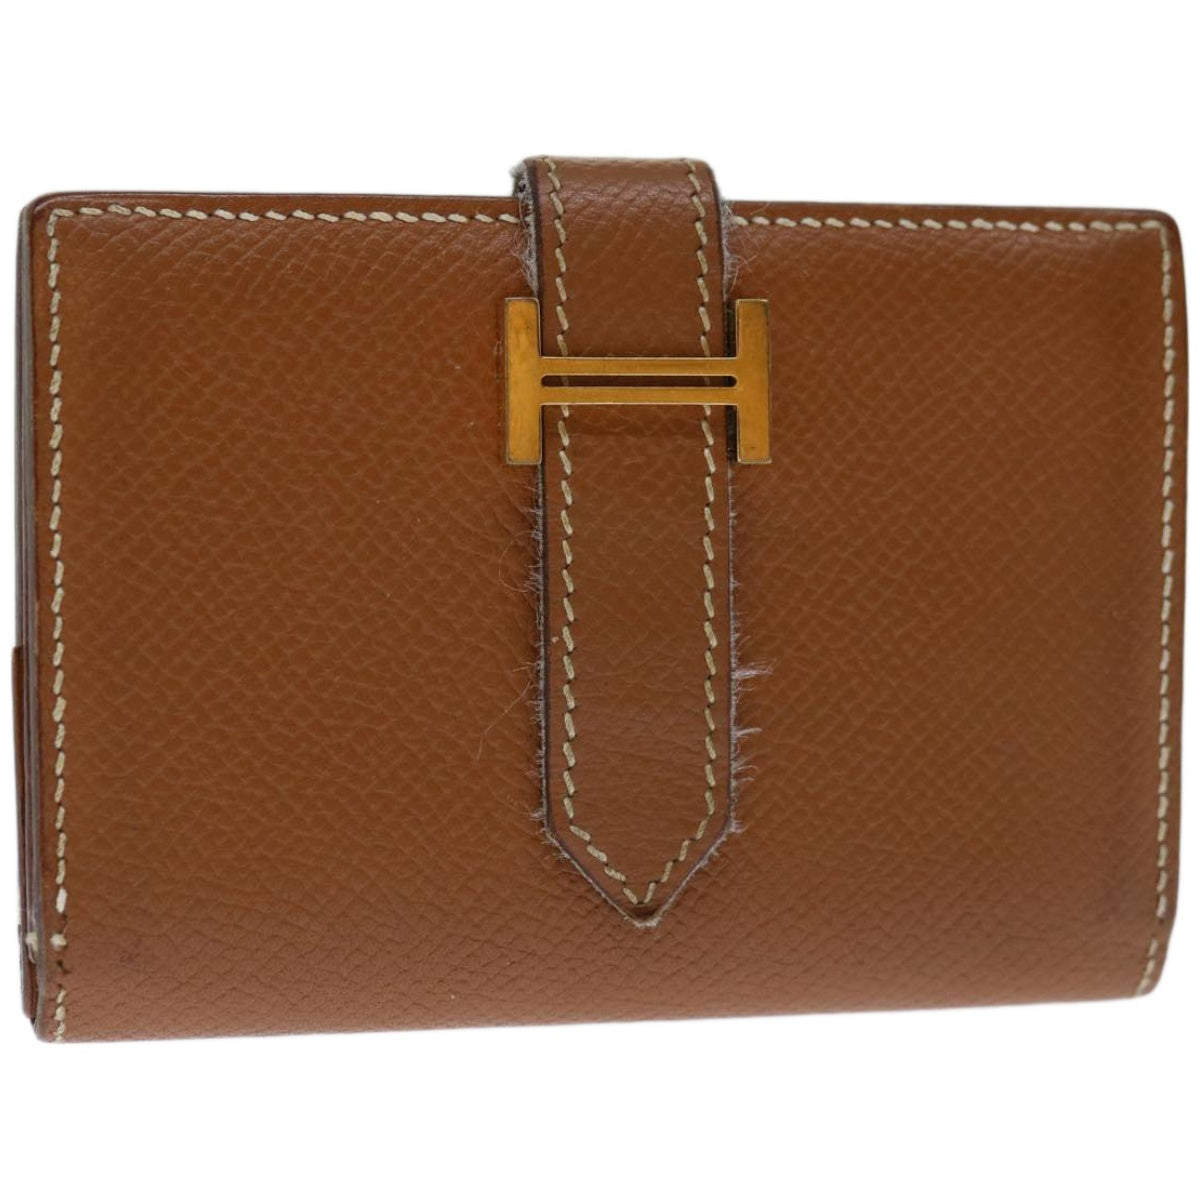 HERMES Bearn Card Case Leather Brown Auth 67553